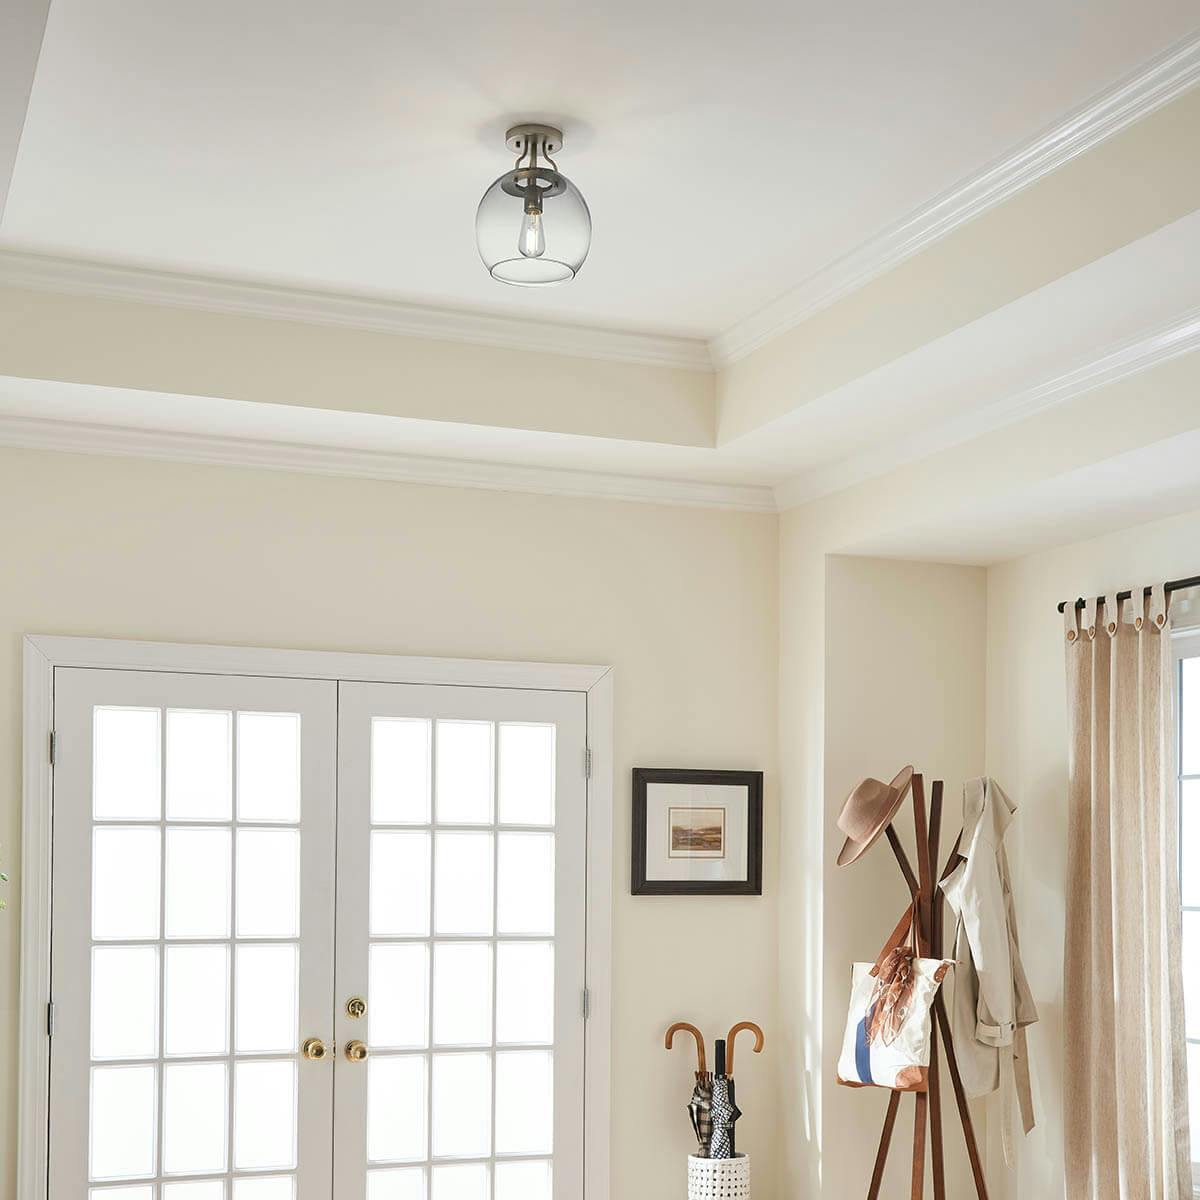 Day time foyer with Harmony 1 Light Semi Flush in Brushed Nickel